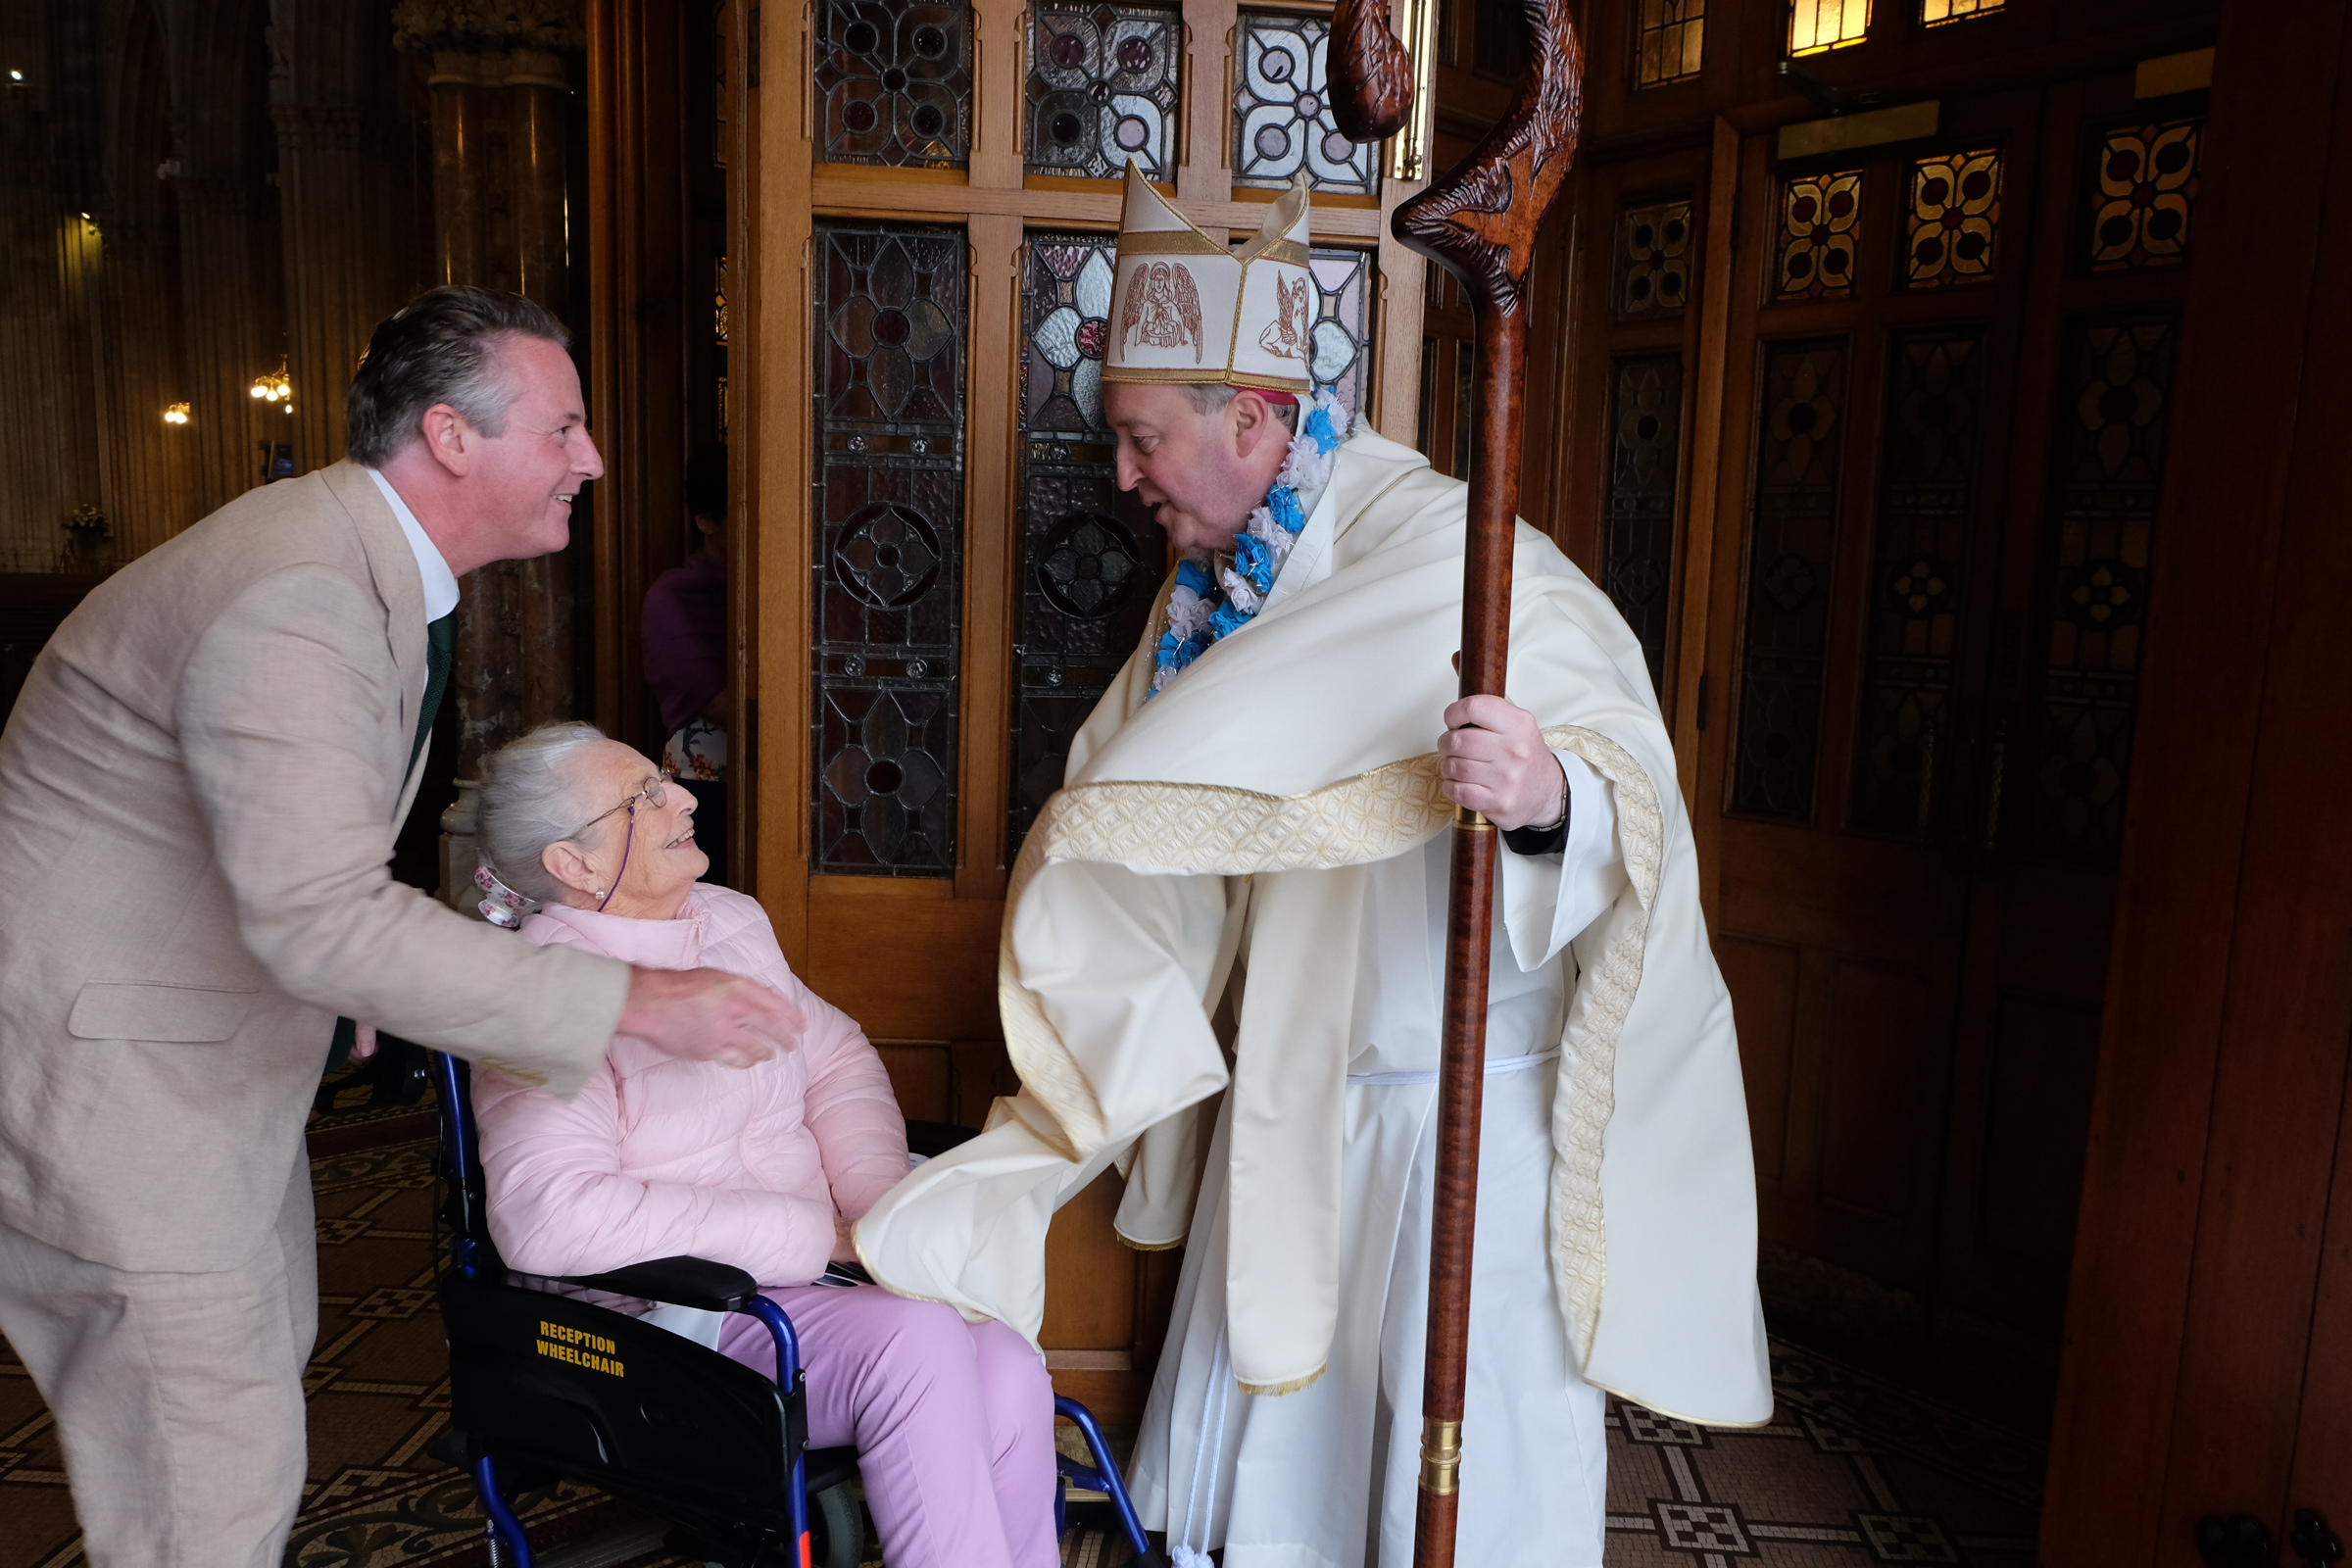 Renowned Sculptor Donie MacManus and his mother Mary with Bishop Michael RouterOrdination of Bishop Michael RouterSt Patrick's Cathedral, Armagh,  21 July 2019Credit: LiamMcArdle.com